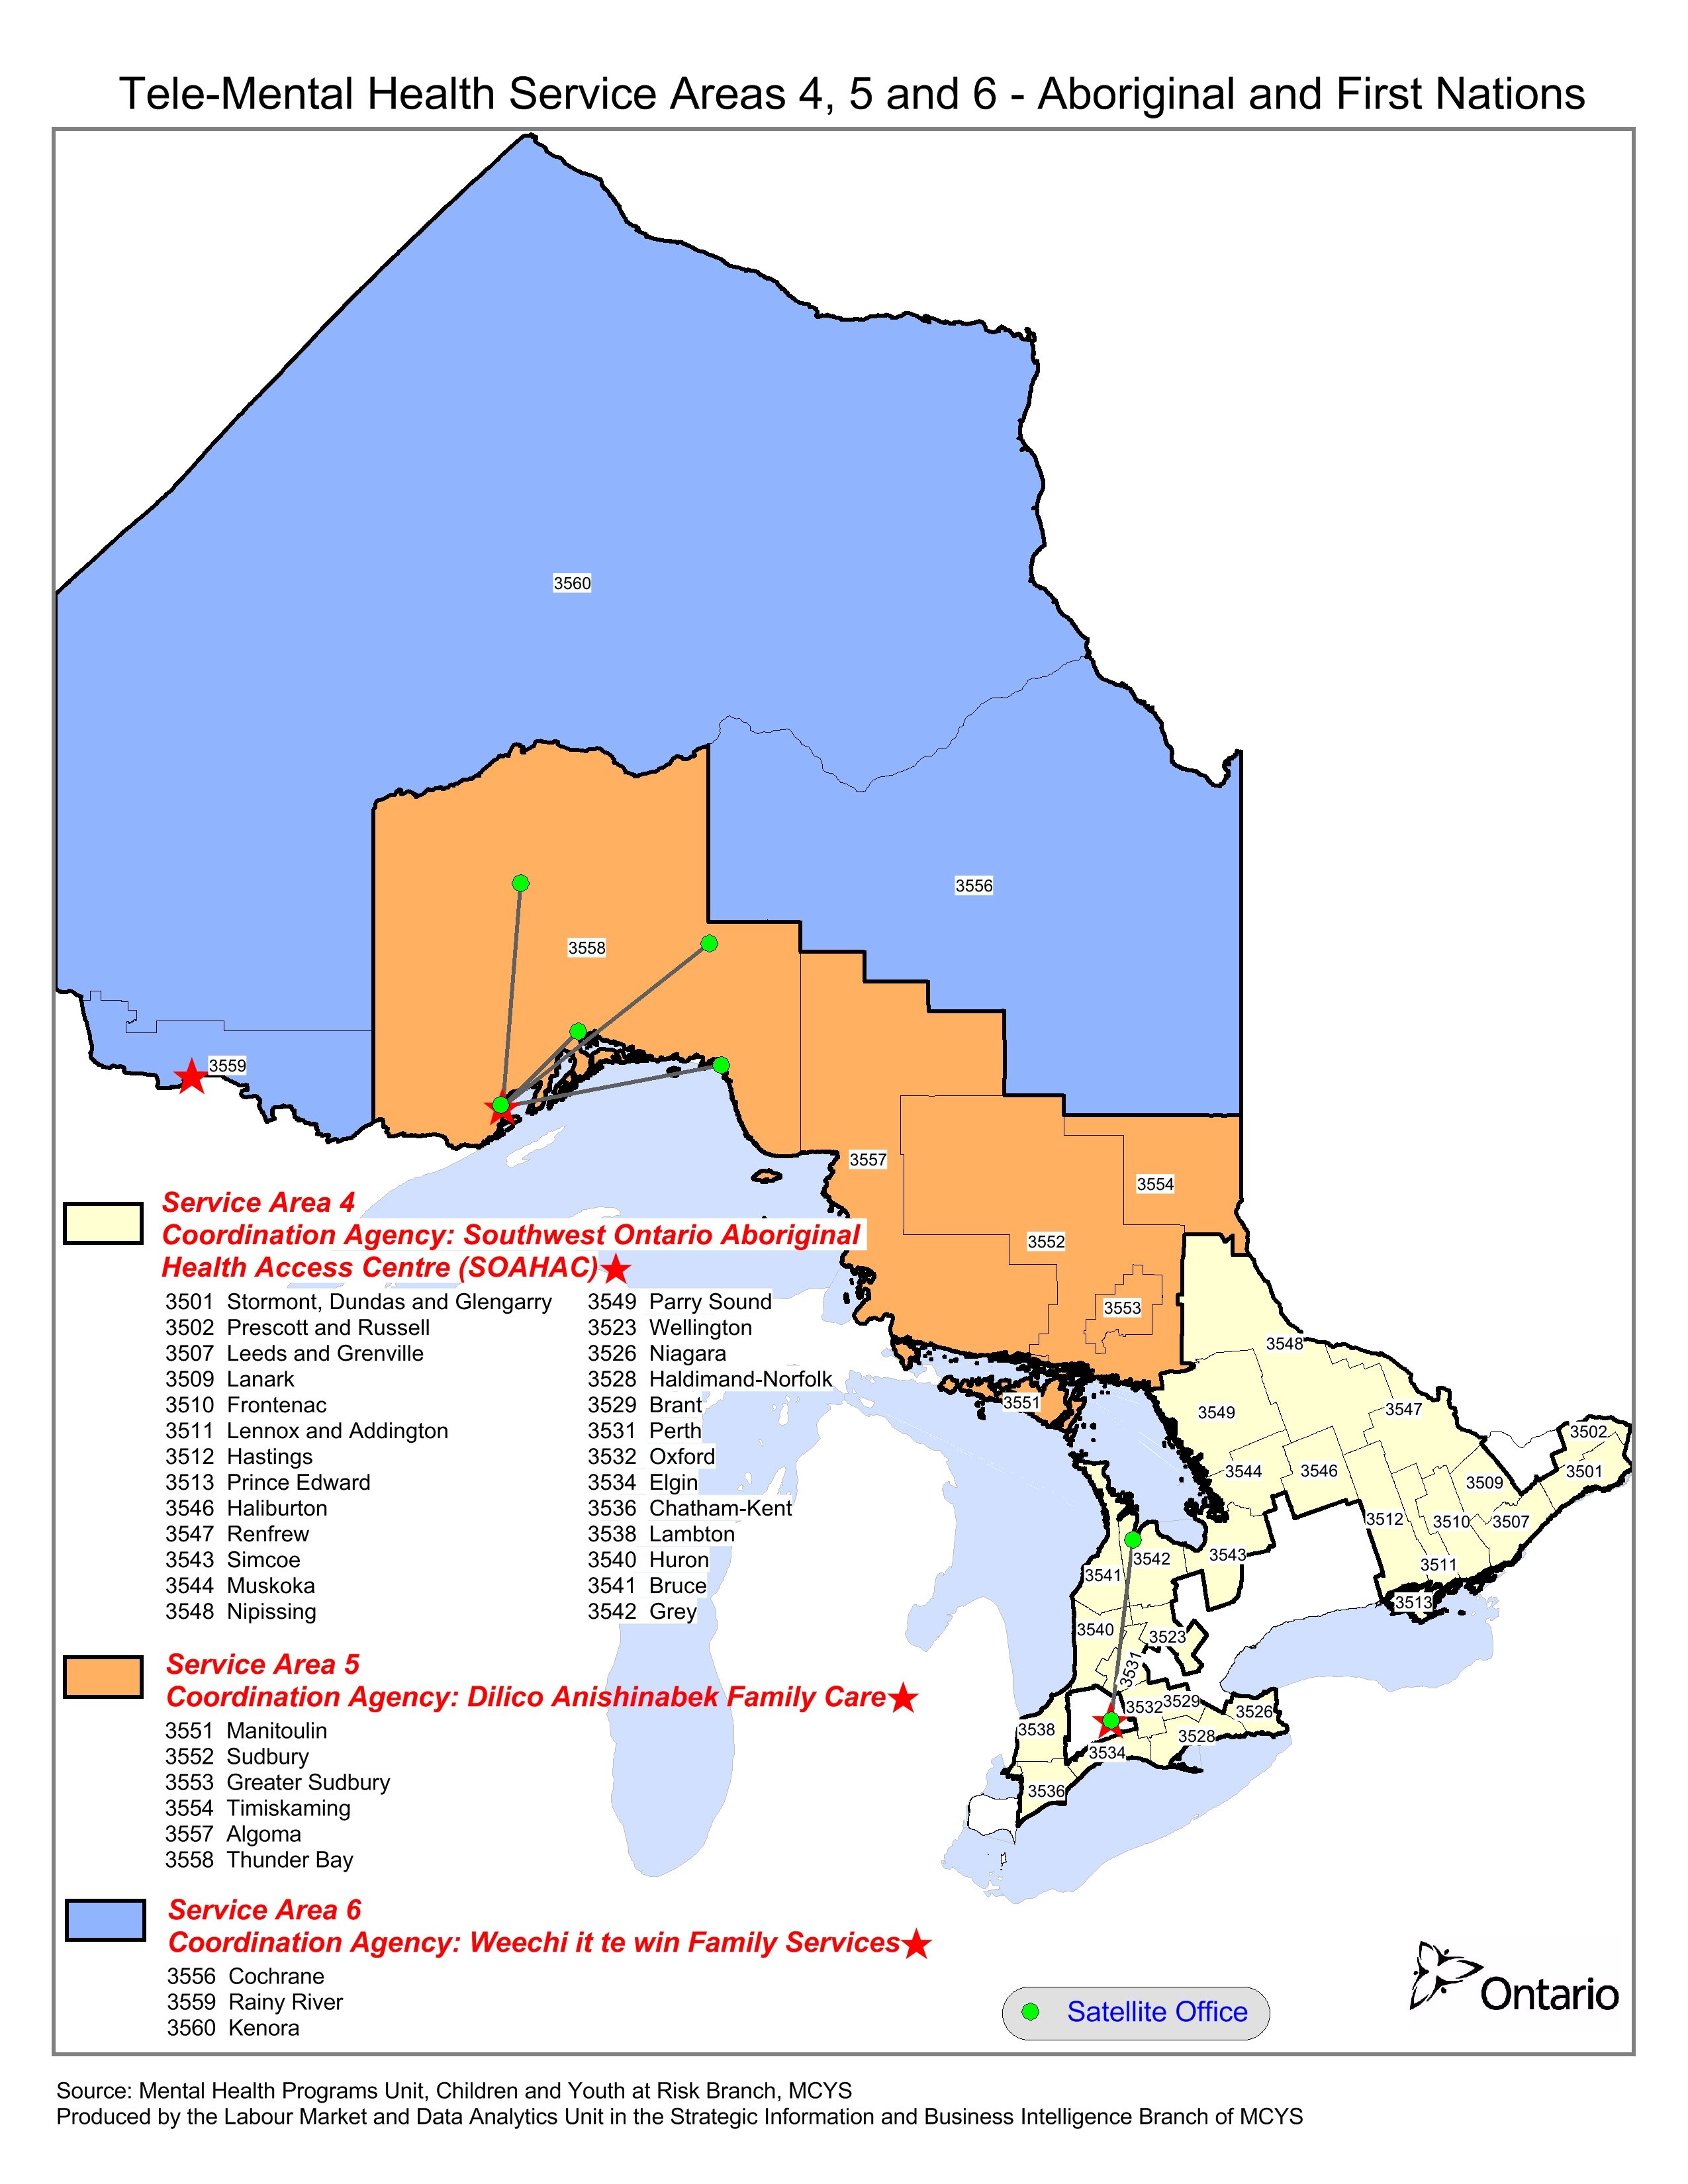 Map of First Nations service area 4: Southwestern Ontario; service area 5: West Ontario; and service area 6: Northwestern Ontario.